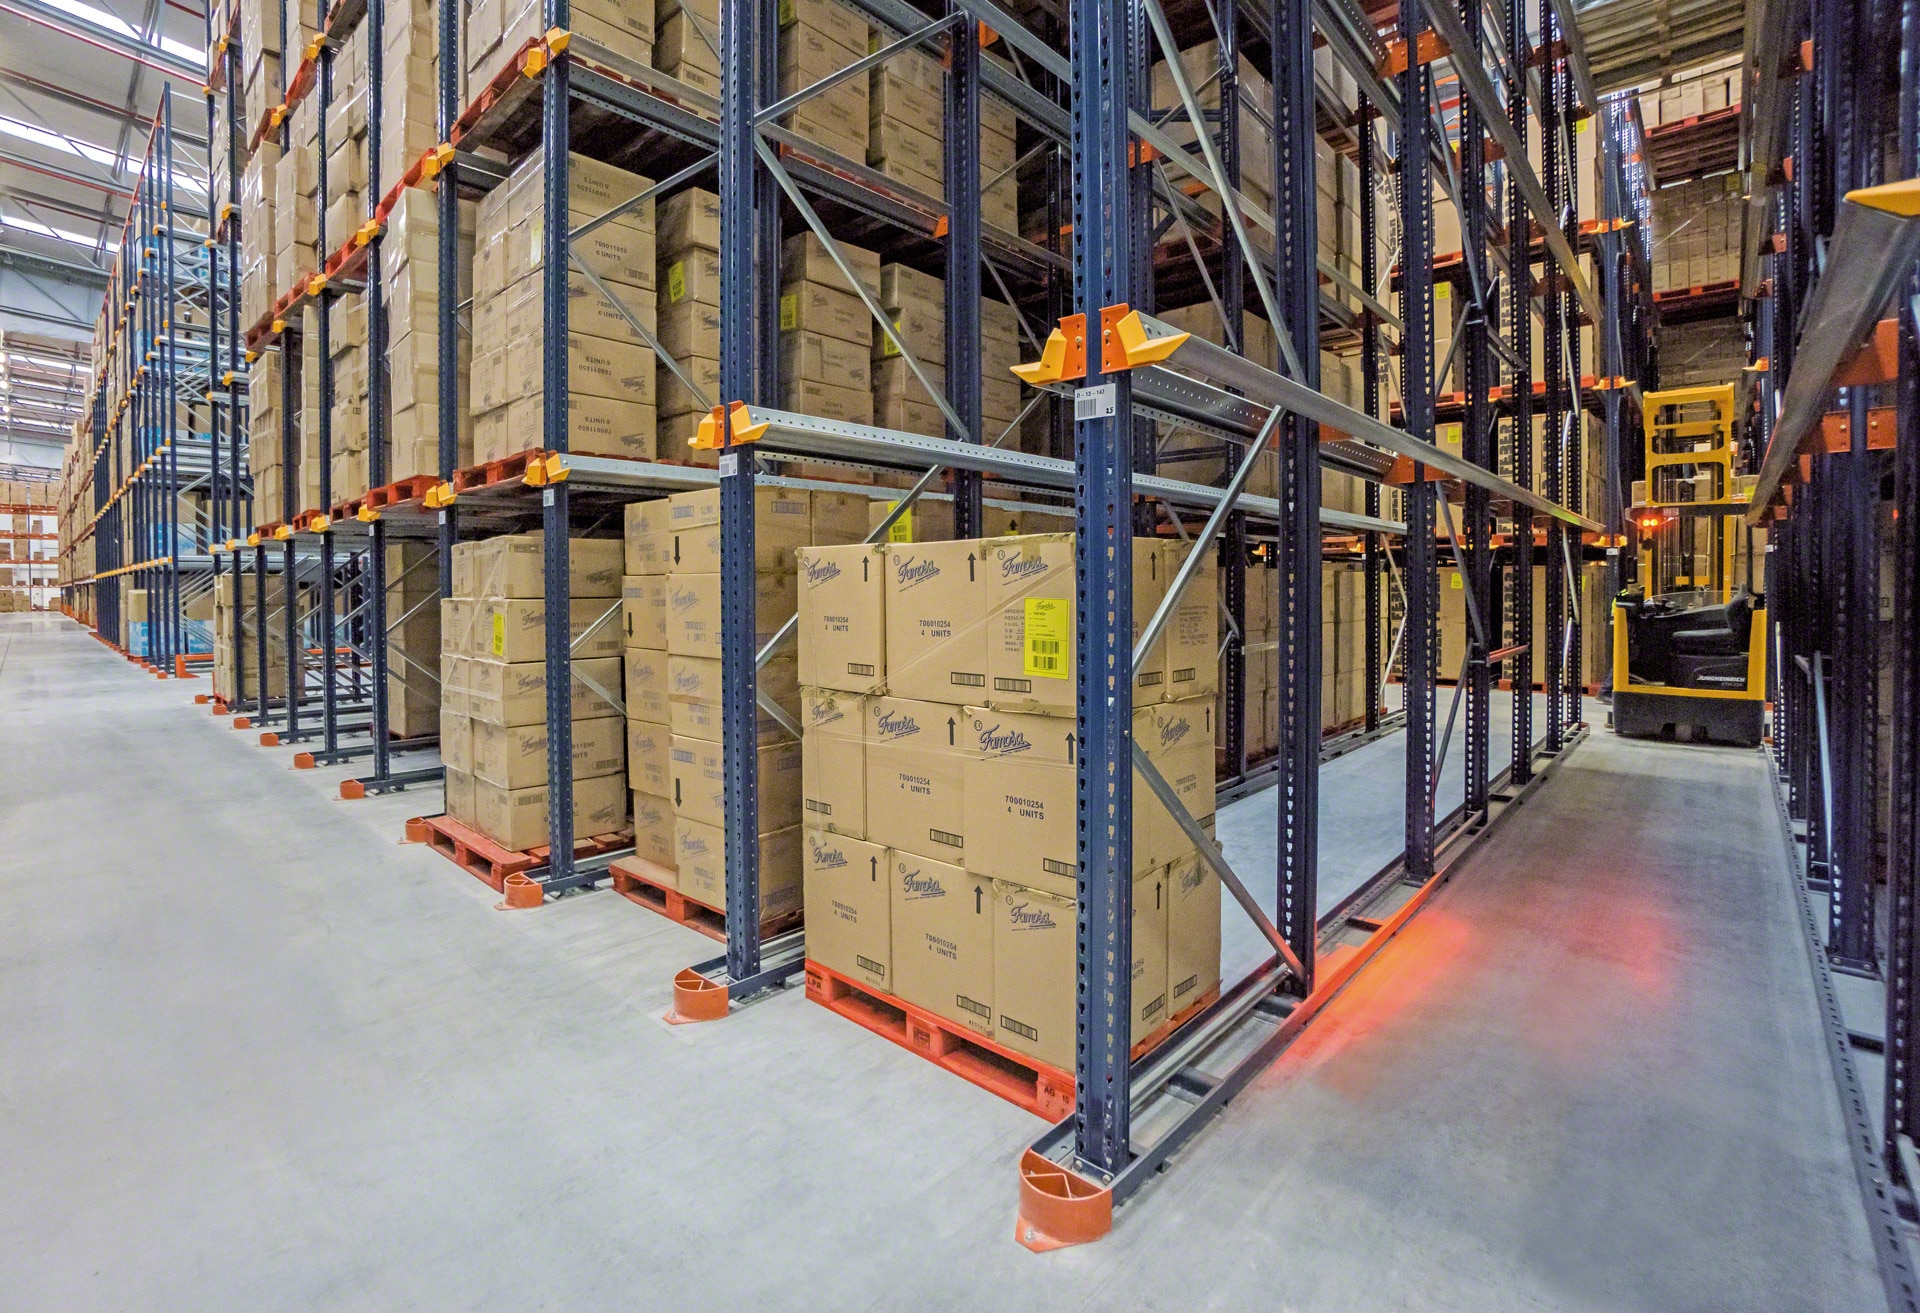 The lower guide rails make it easier for the forklifts to move inside the drive-in racking